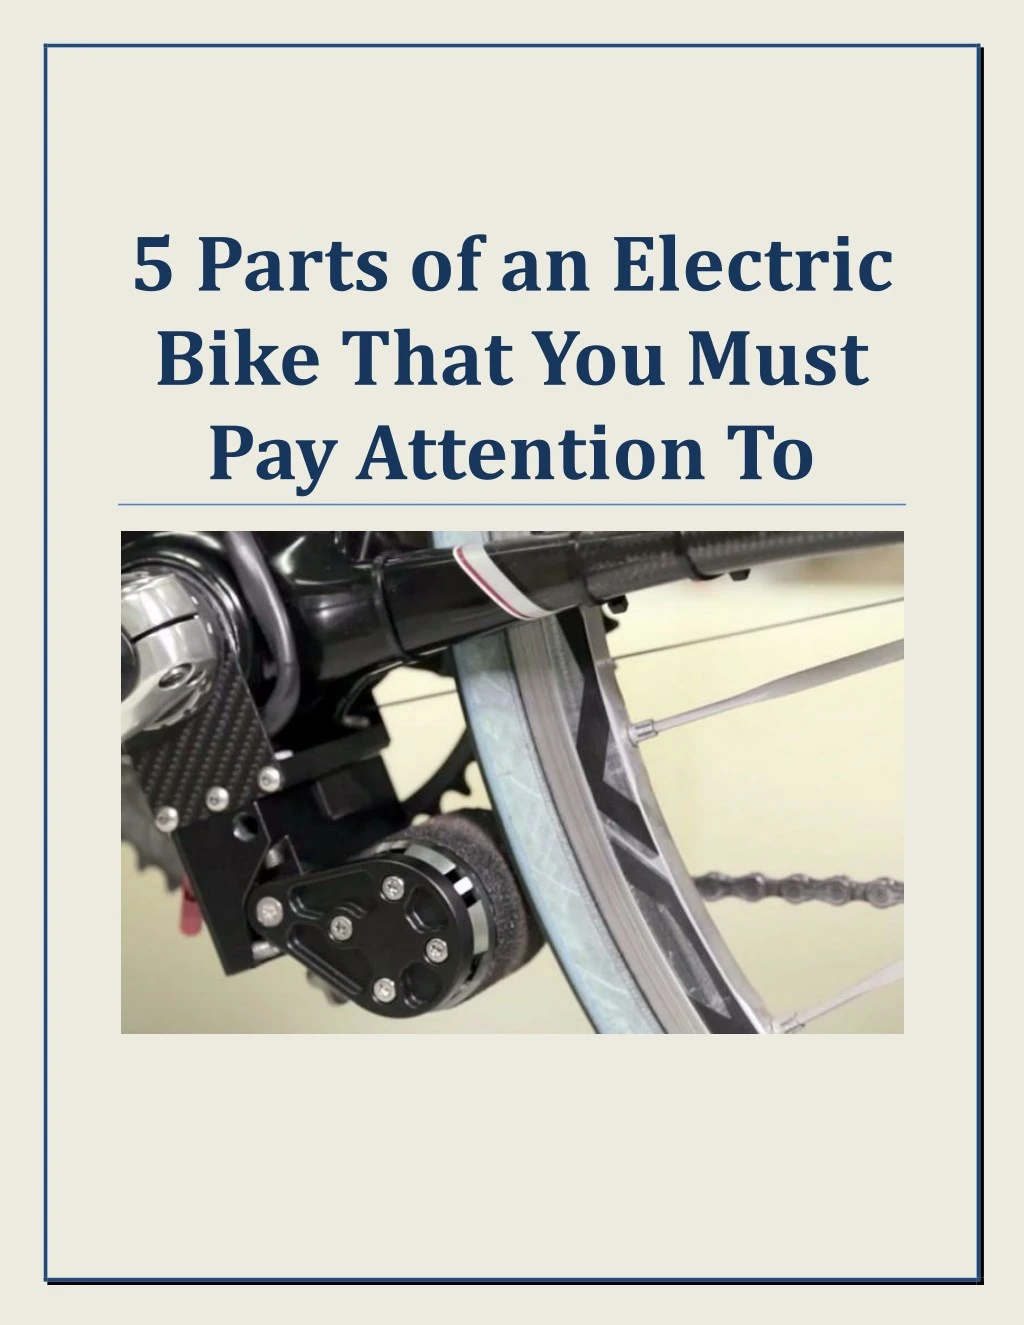 5 parts of an electric bike that you must